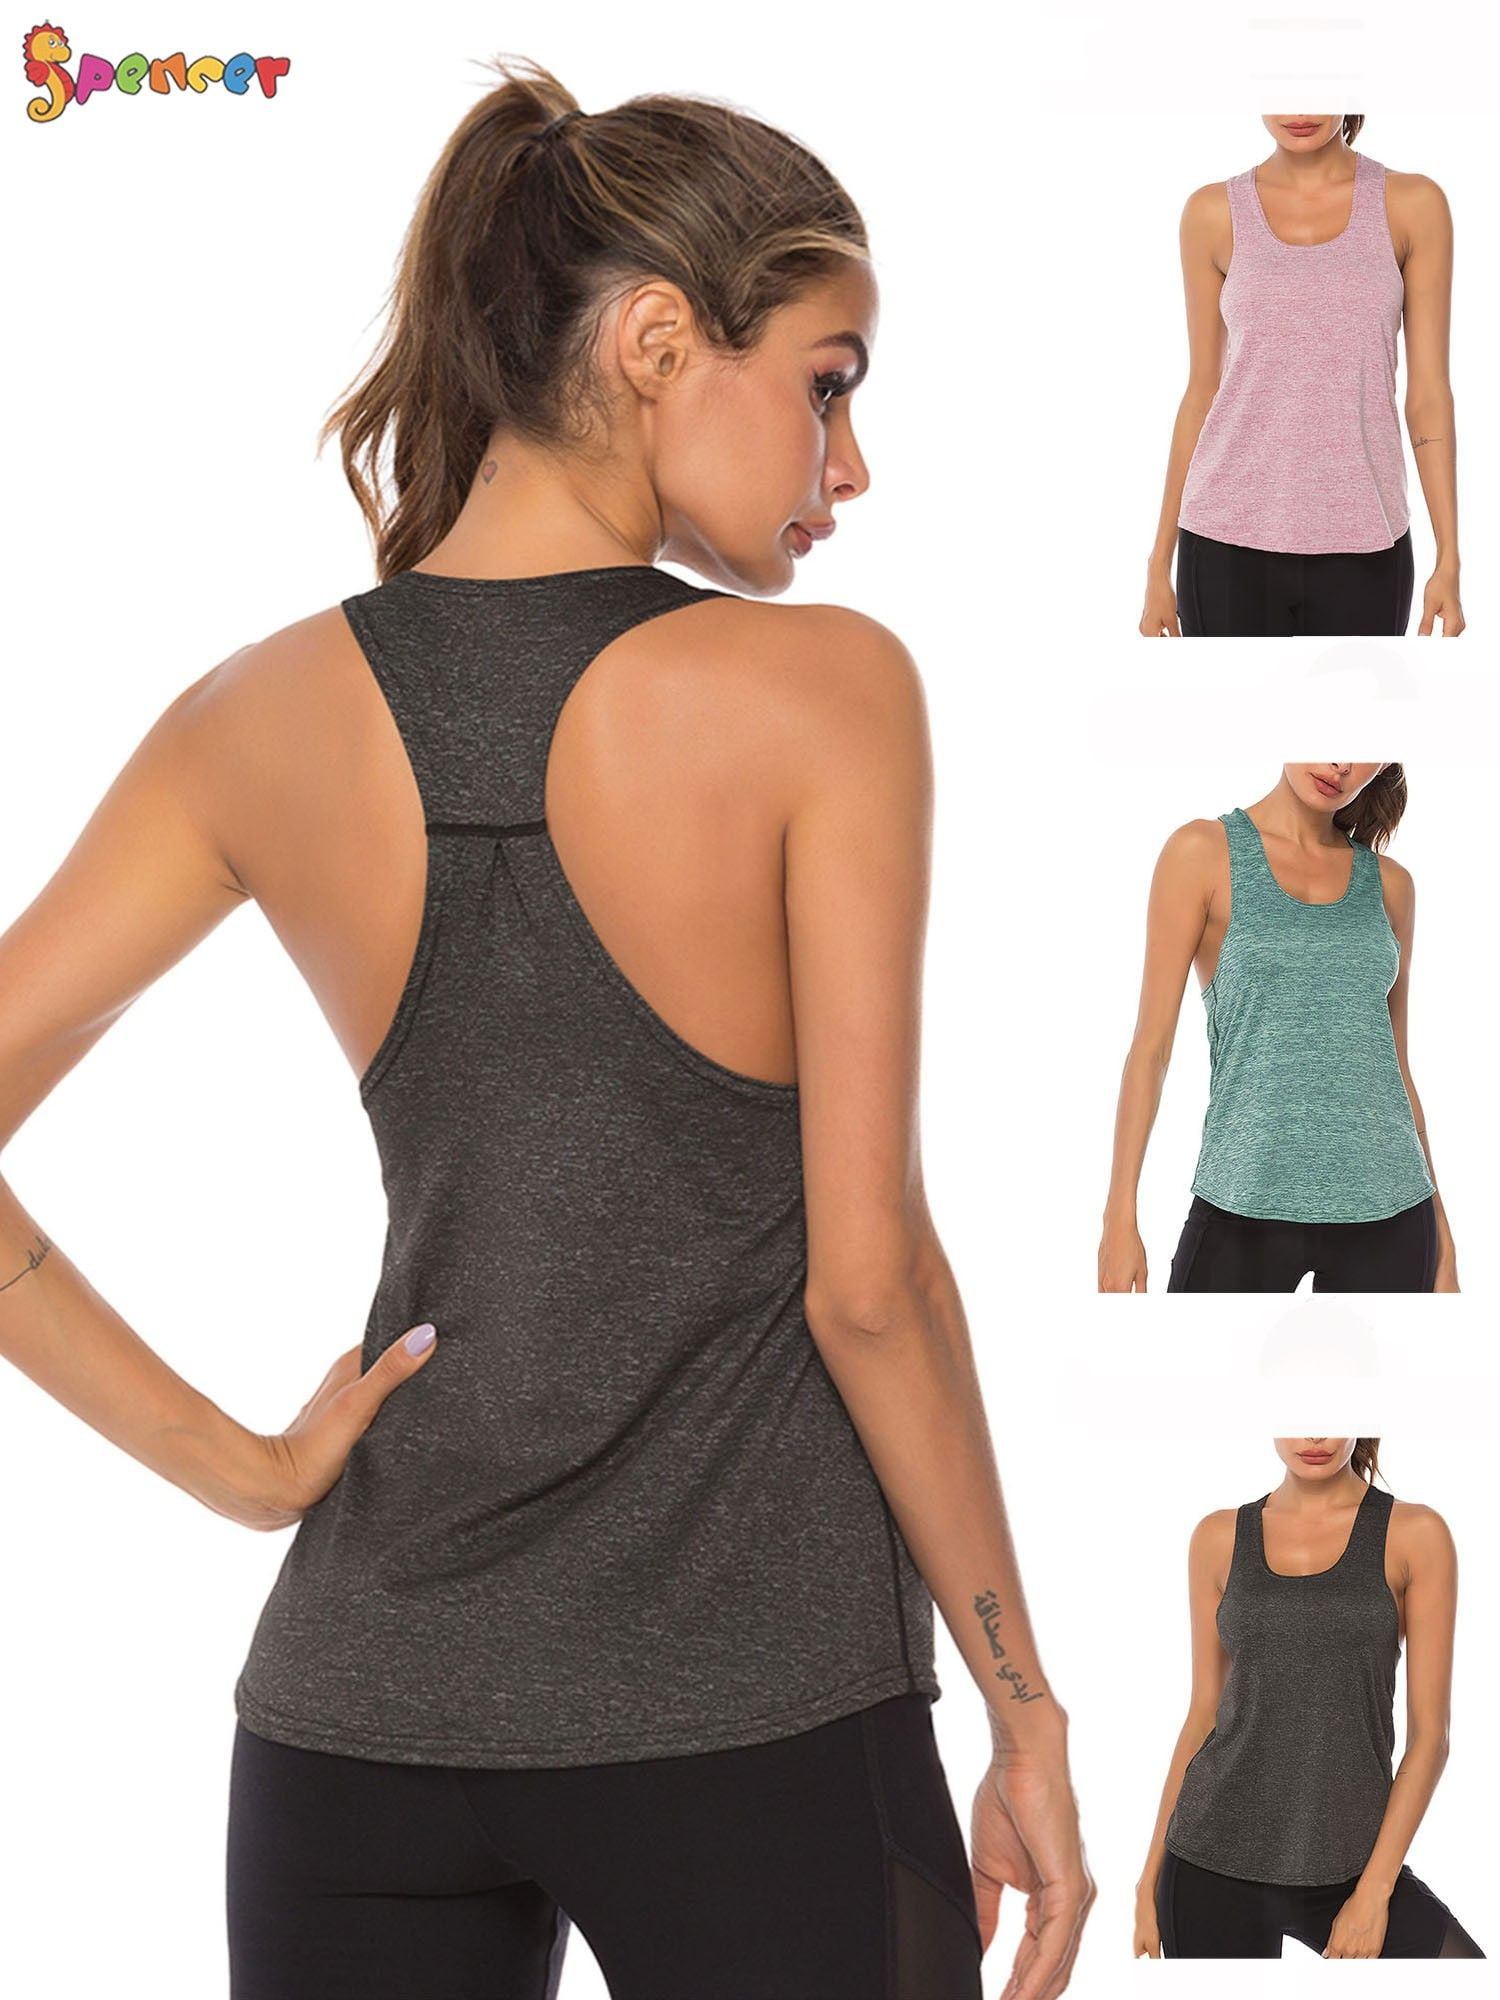 Women's Workout Shirts & Tops for Training